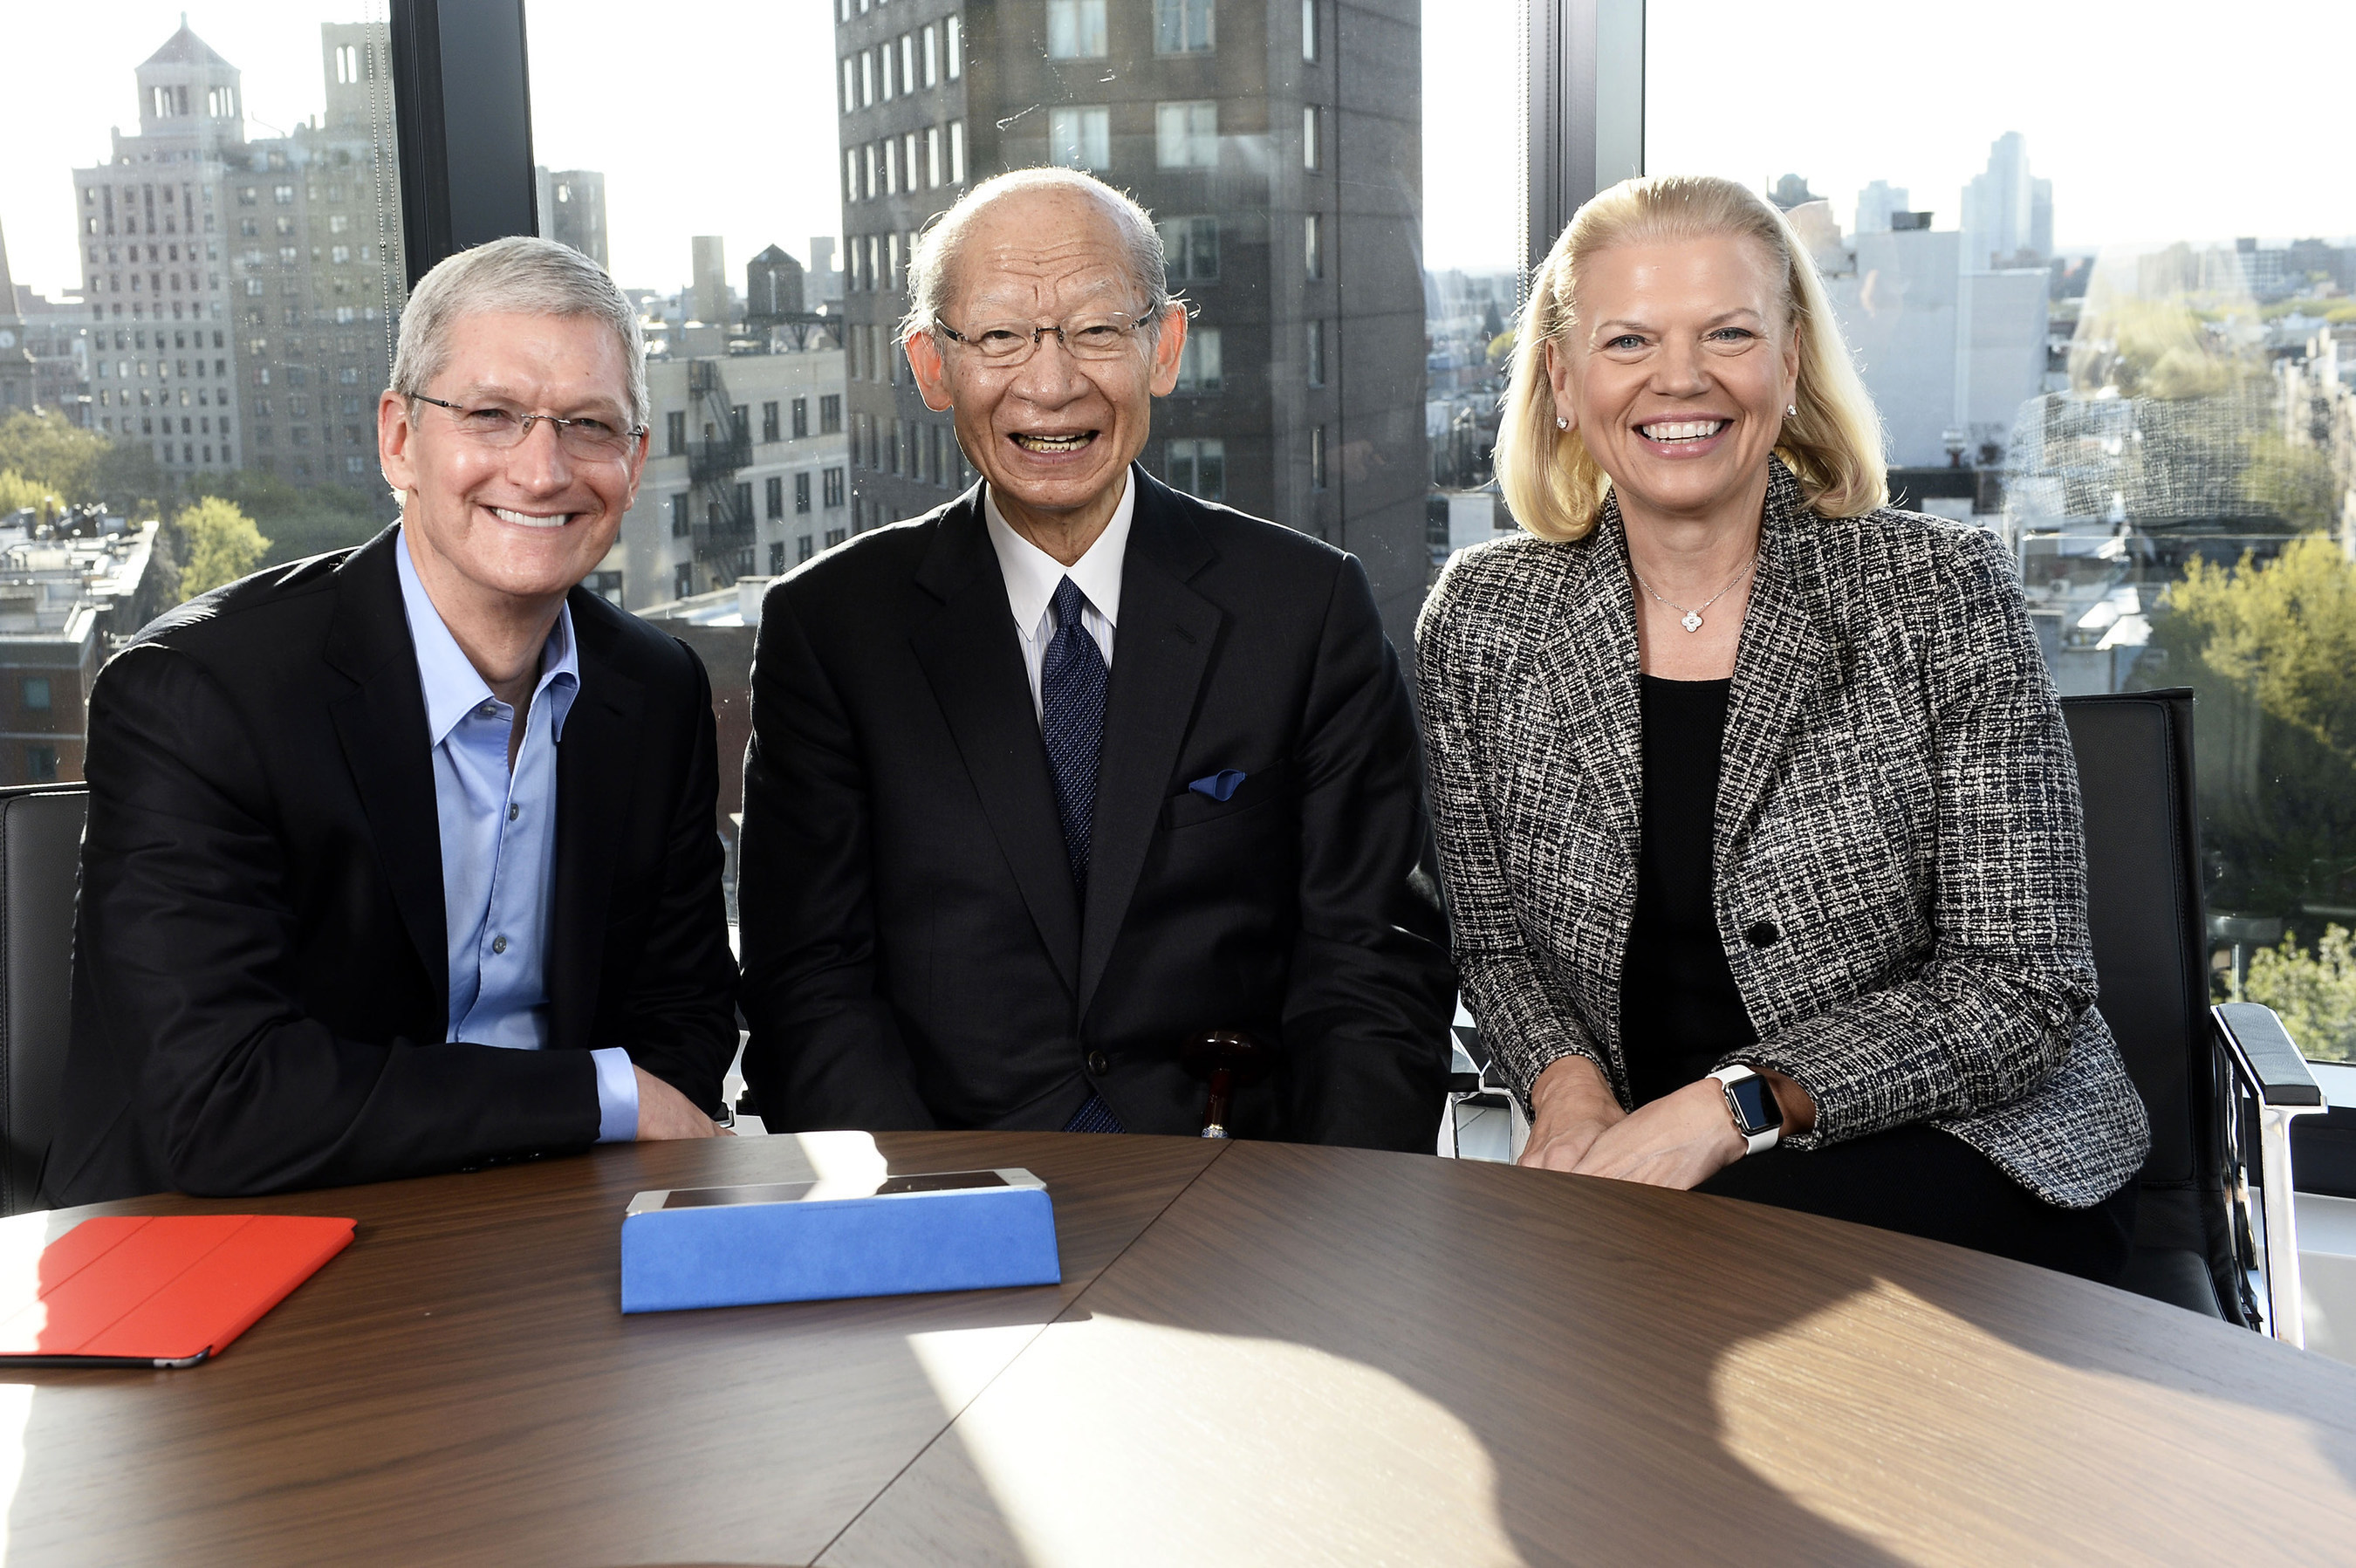 Apple CEO Tim Cook, left, CEO of Japan Post Holdings Mr. Taizo Nishimuro and IBM CEO Ginni Rometty announce a first-of-its-kind initiative to address the economic and societal issues of the aging population in Japan in New York City on Thurs., April 30, 2015. Building on the landmark Apple-IBM partnership, the companies plan to bring the power of iPad together with IBM-developed apps and the accessibility technologies of IBM and Apple to connect millions of seniors in Japan with services, communities and their families.